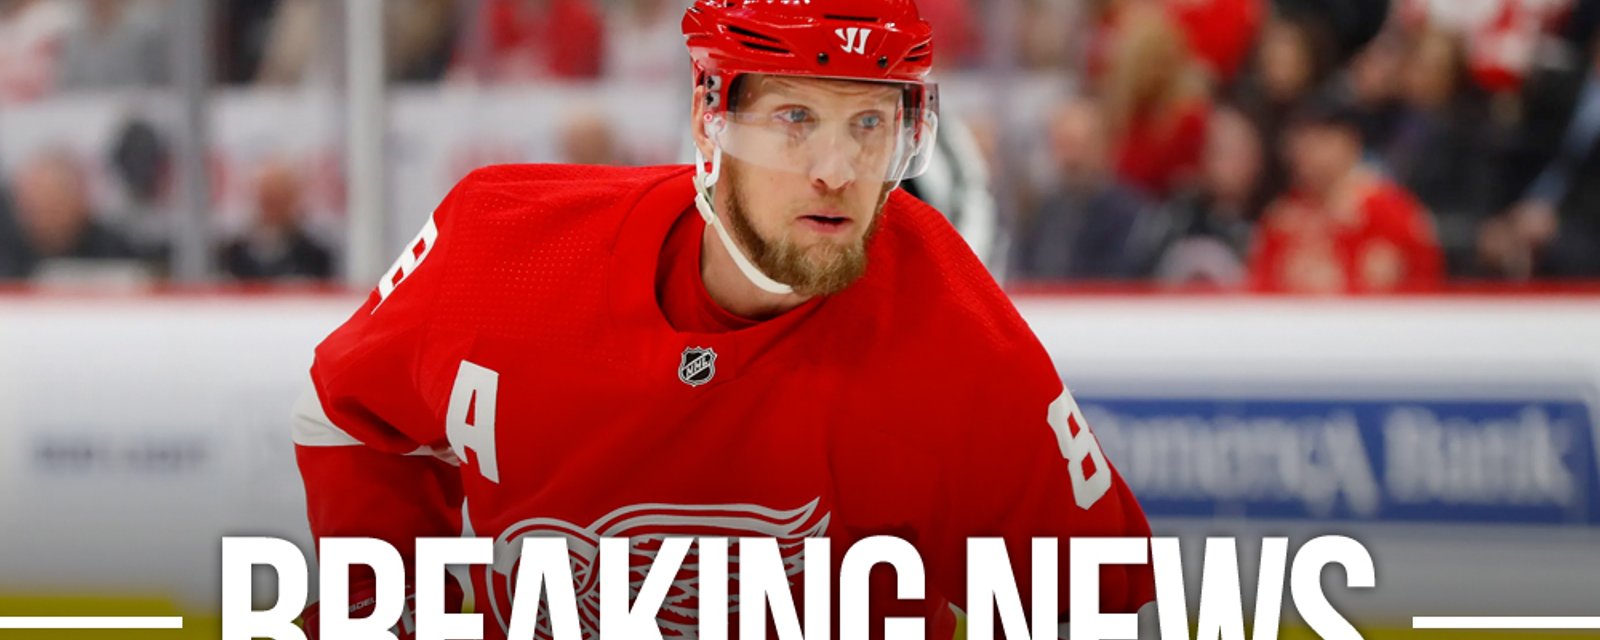 Abdelkader takes a last ditch effort at resuming his NHL career